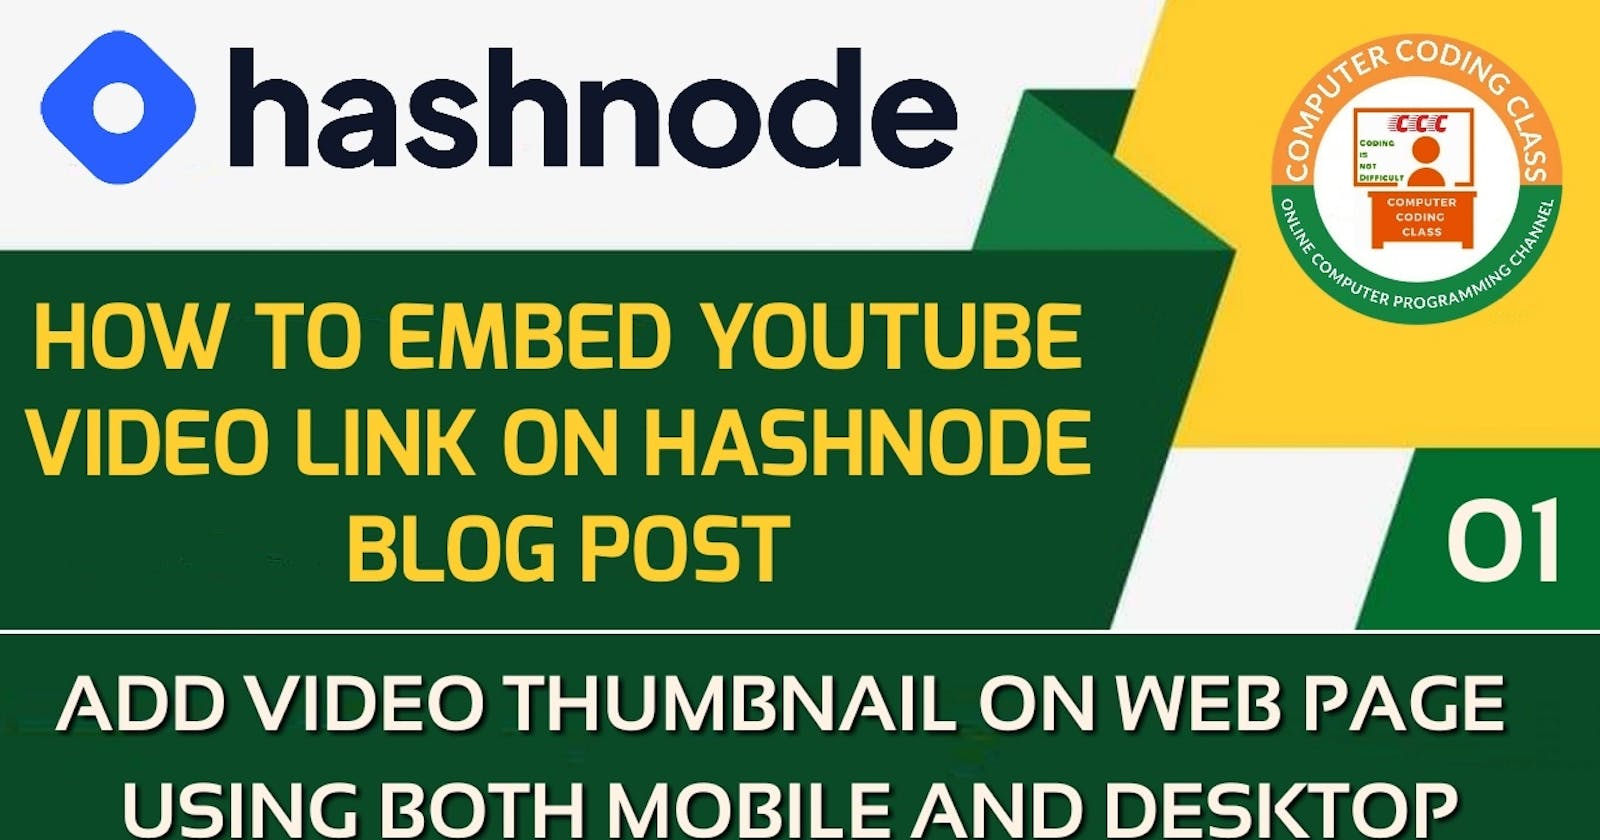 How to Embed YouTube Video on Hashnode Blog